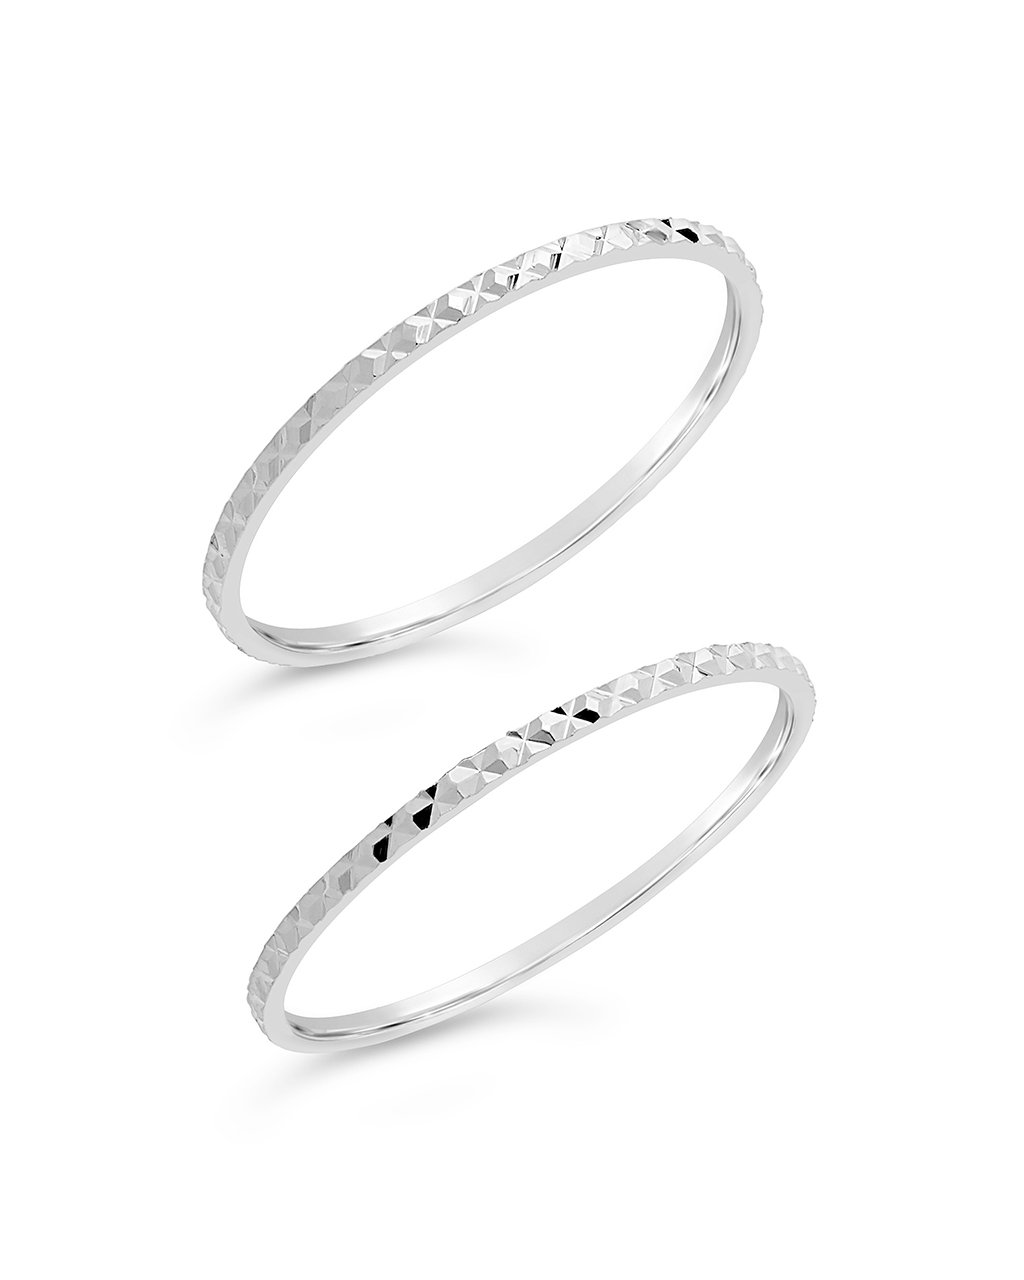 Sterling Silver Diamond Cut Ring Set of 2 - Sterling Forever